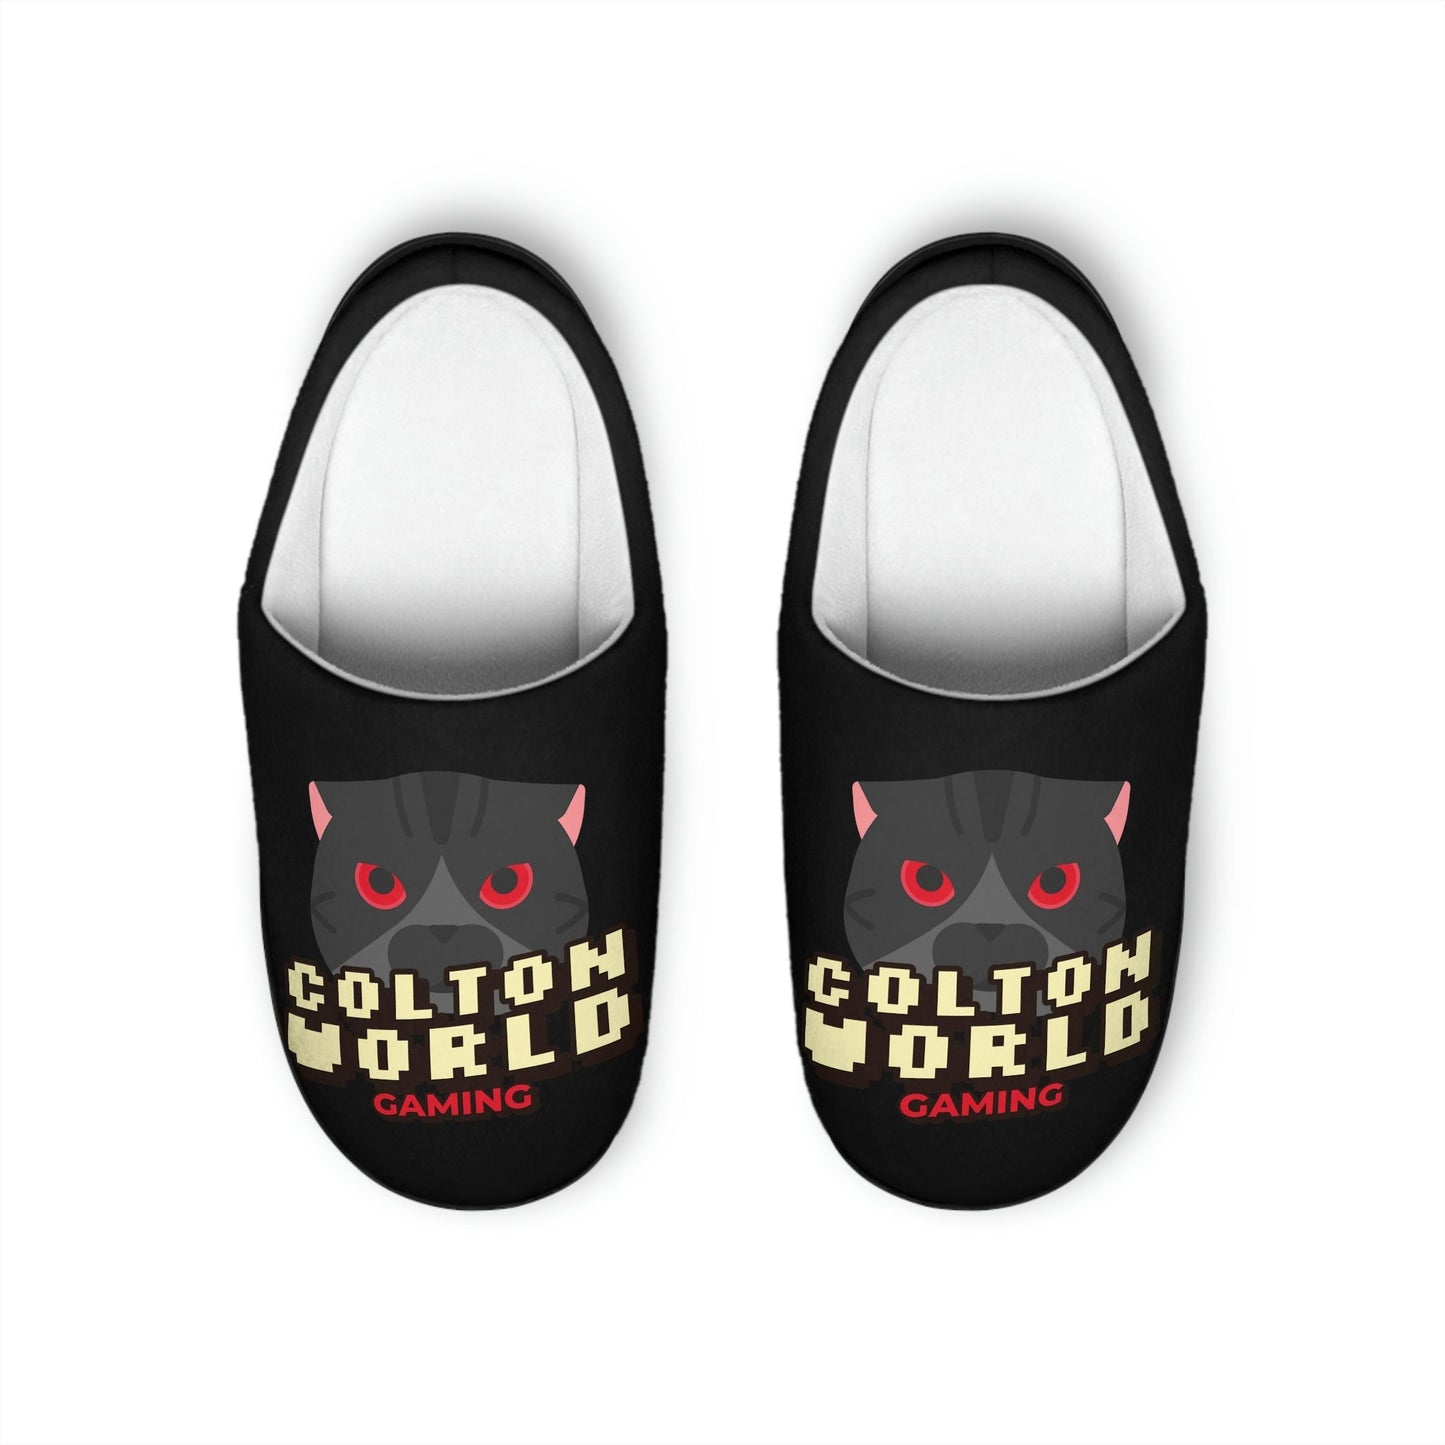 Colton World Slippers